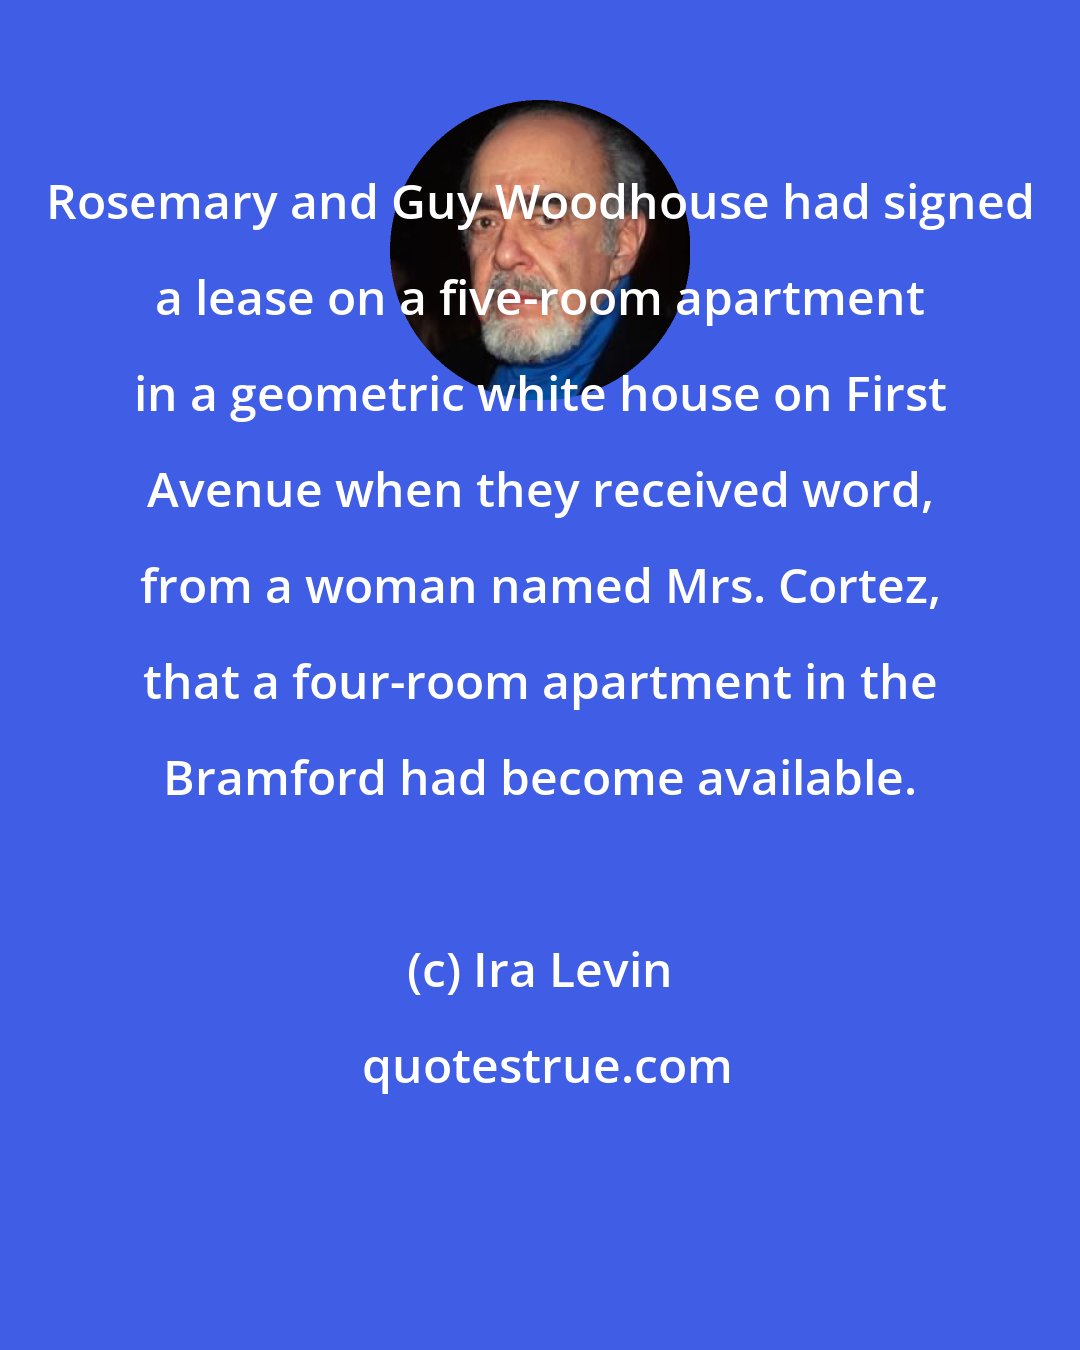 Ira Levin: Rosemary and Guy Woodhouse had signed a lease on a five-room apartment in a geometric white house on First Avenue when they received word, from a woman named Mrs. Cortez, that a four-room apartment in the Bramford had become available.